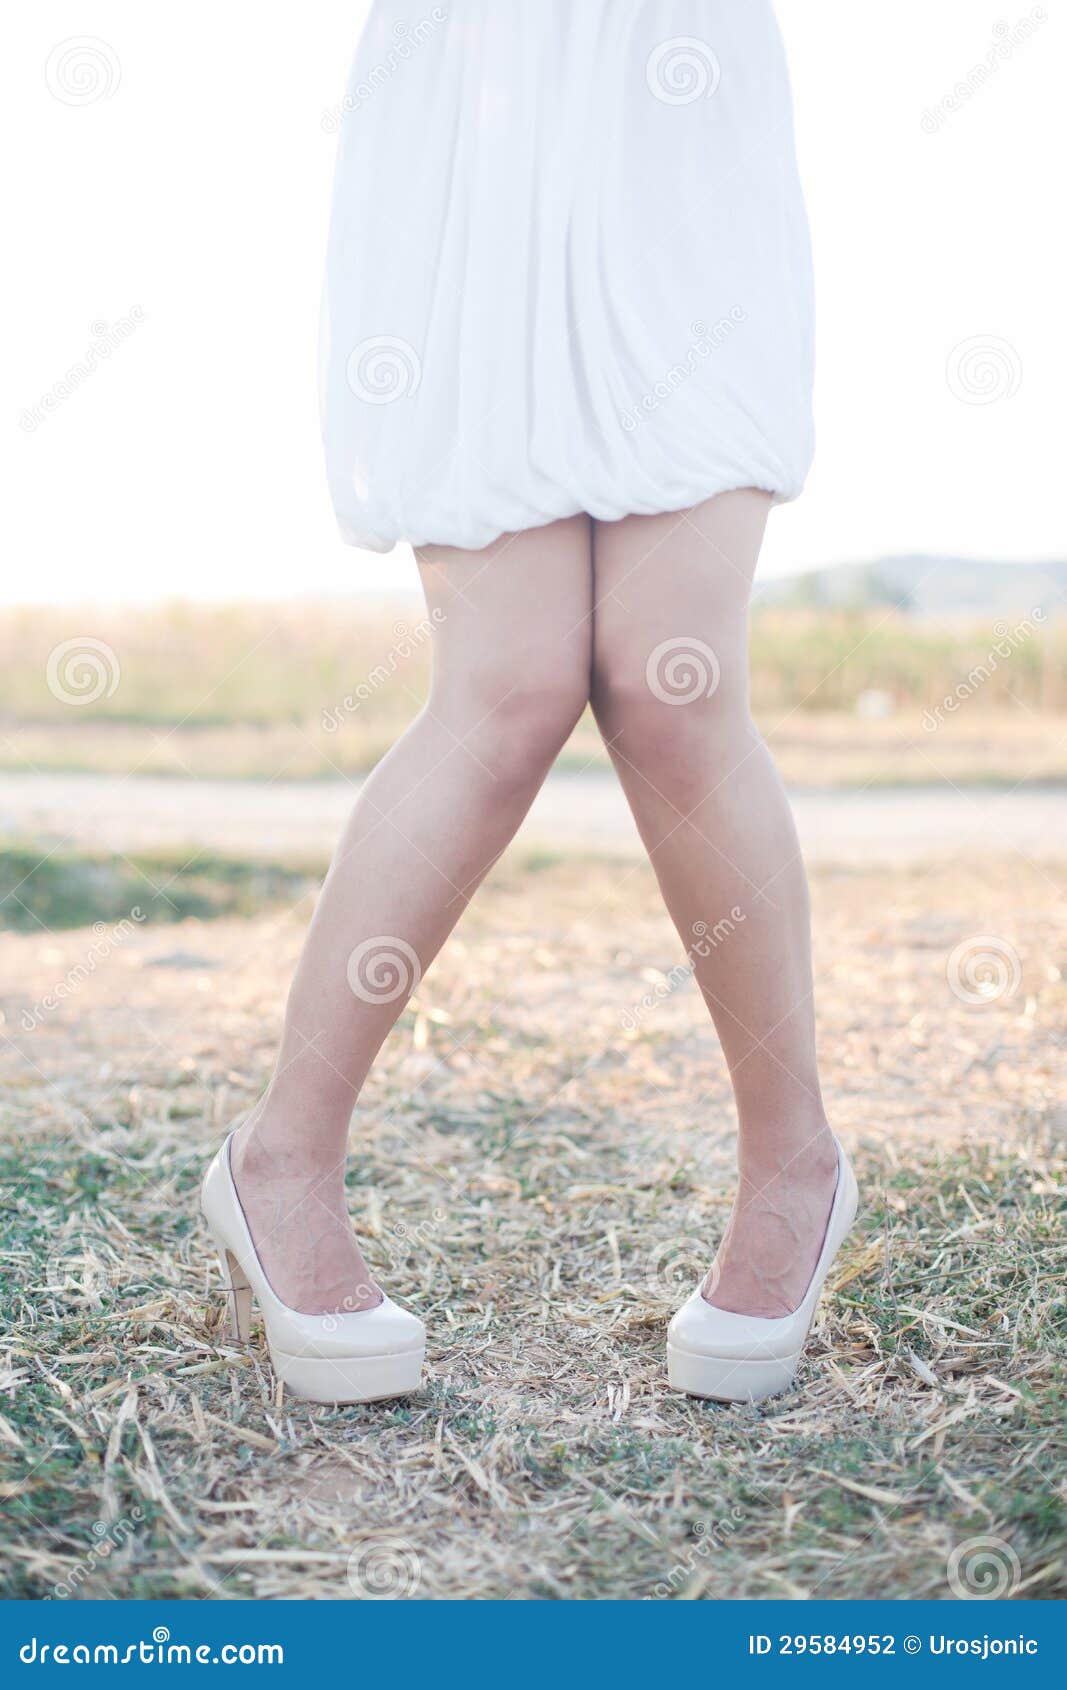 Woman Legs On High Heels Outdoors Stock Photo Image Of Sensuality